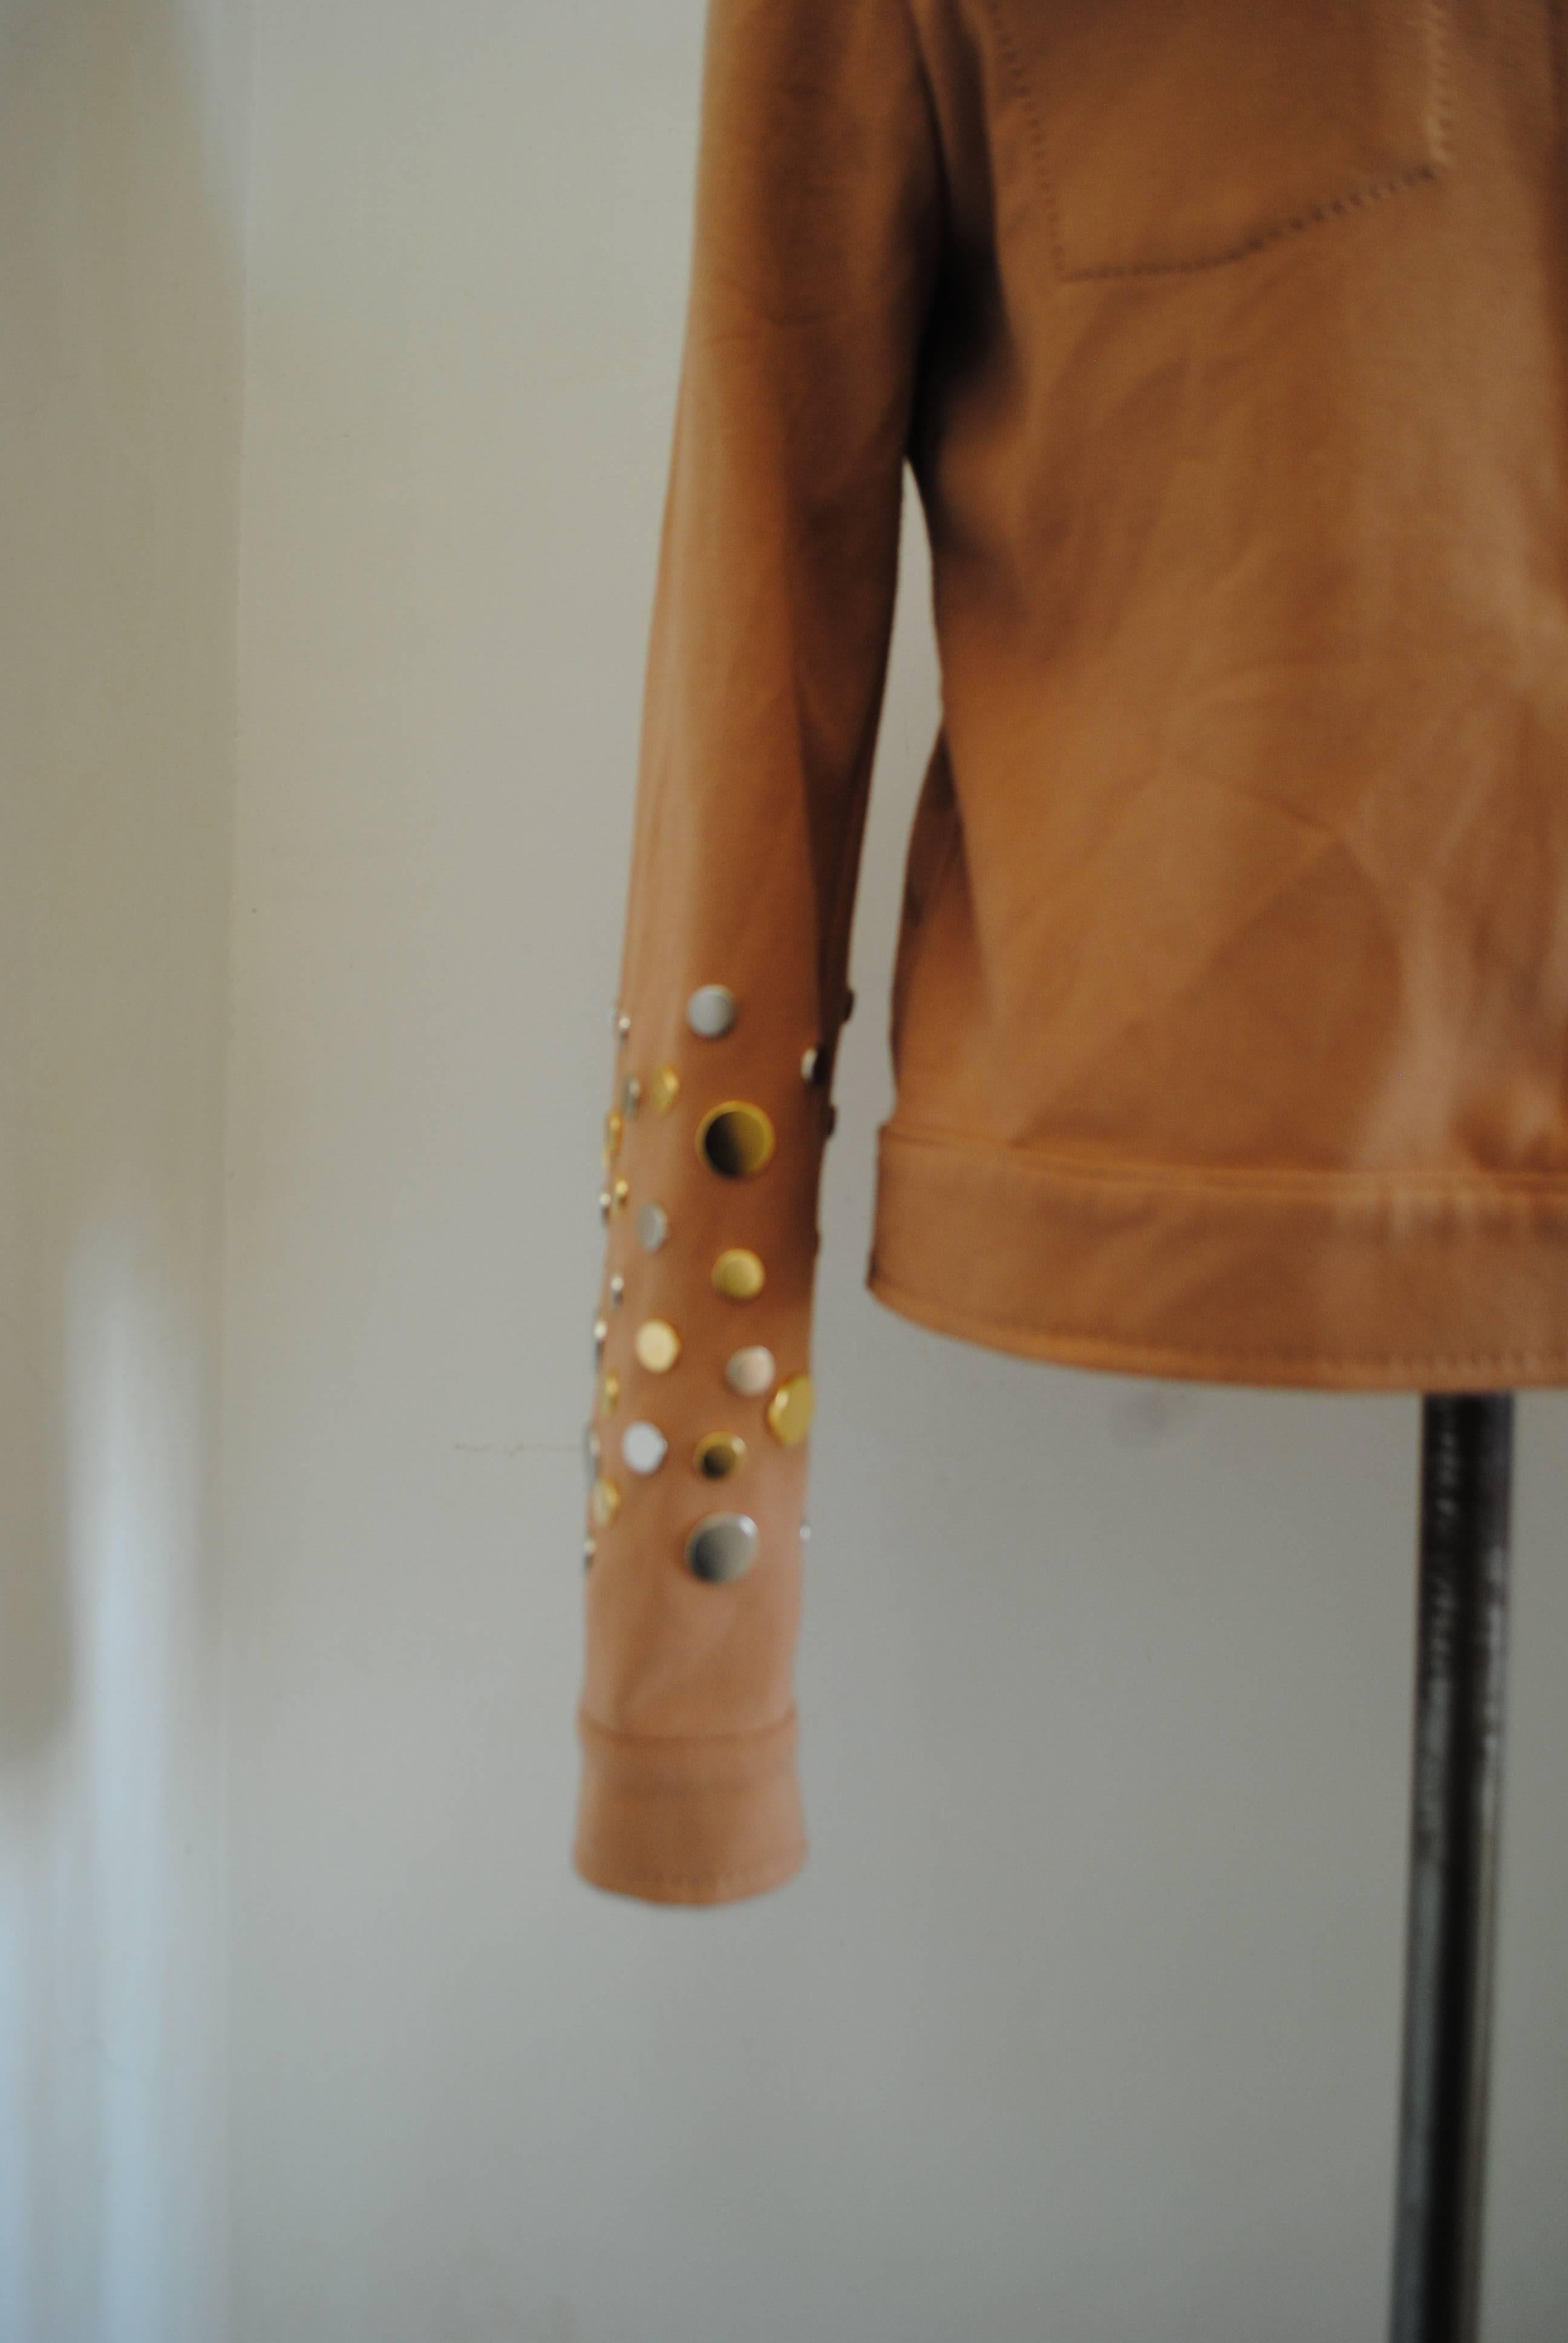 Fendi jacket with studs
Fendi light brown jackets with silver and gold tone studs 
totally made in italy 
Composition: Polyestere and viscose
Size: 42 italian size range